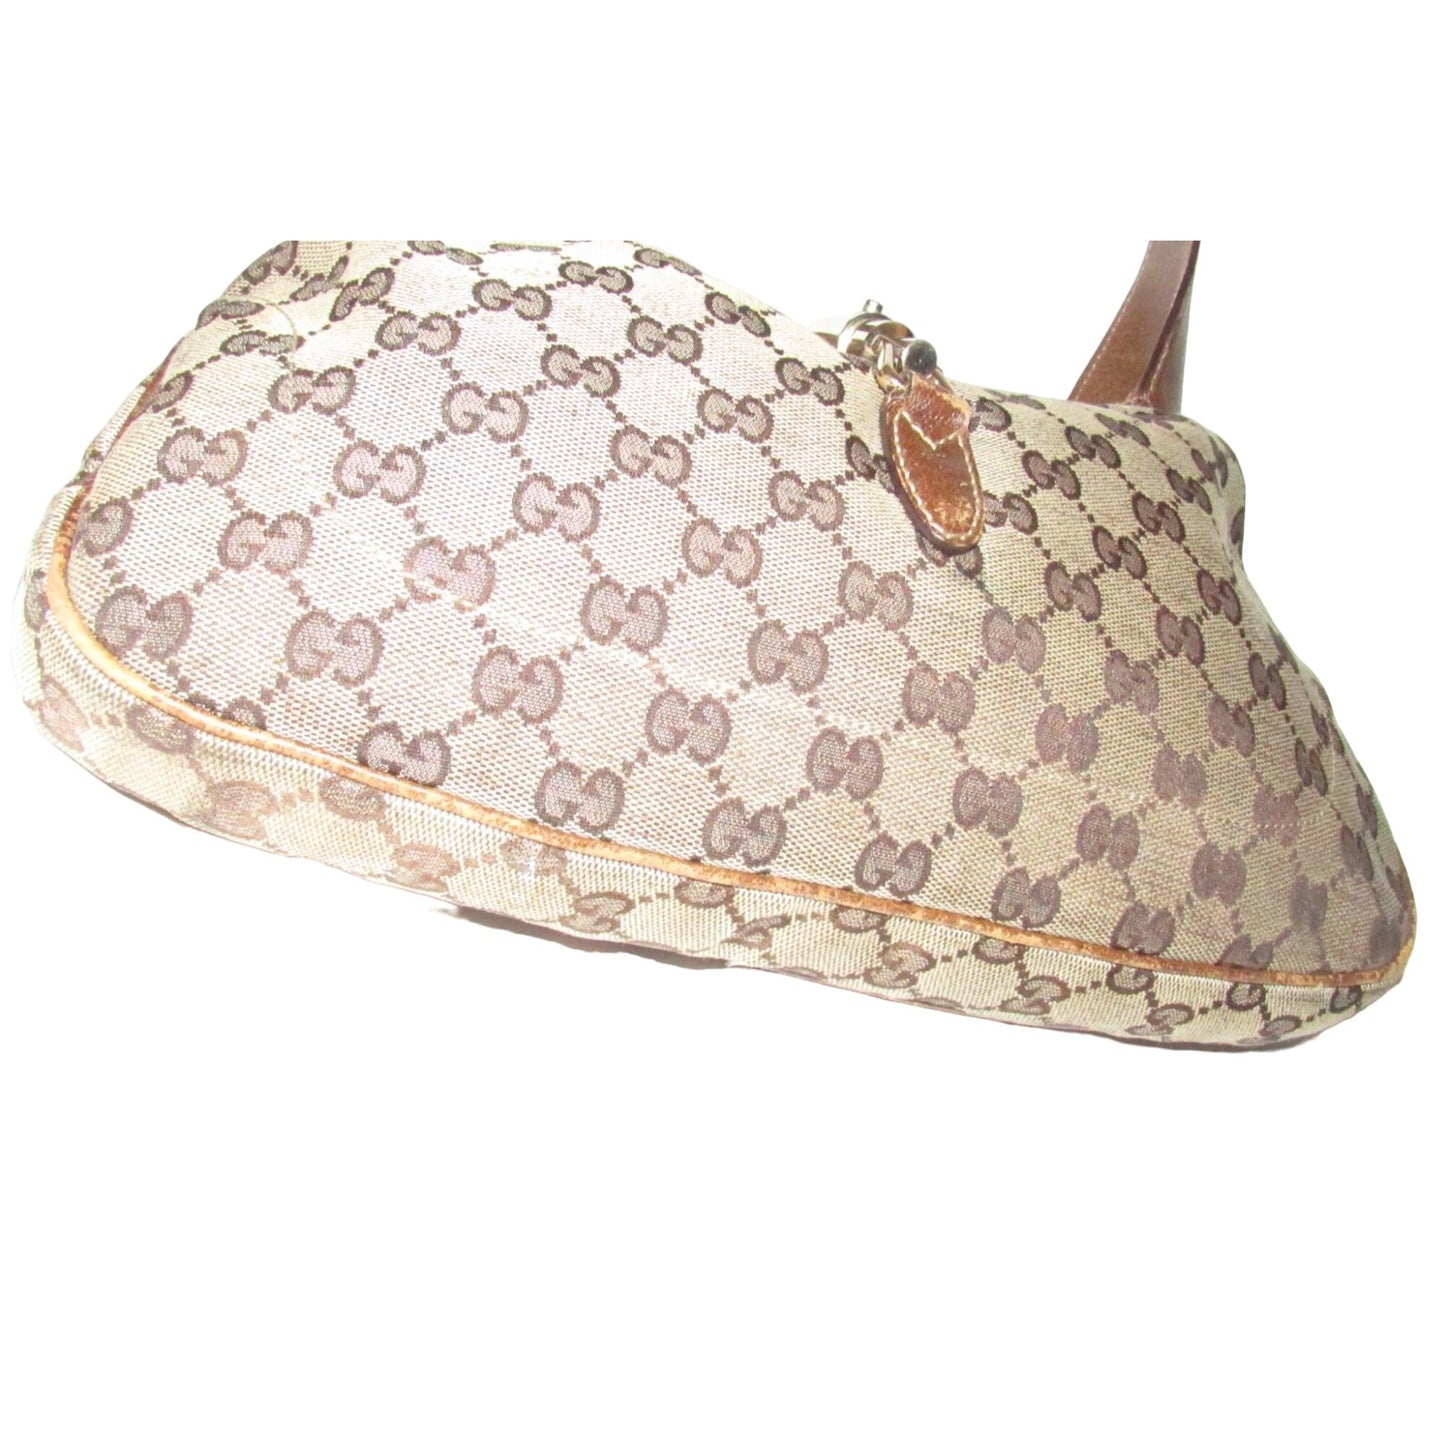 Gucci brown Guccissima print XL Jackie hobo with a gold piston clasp!